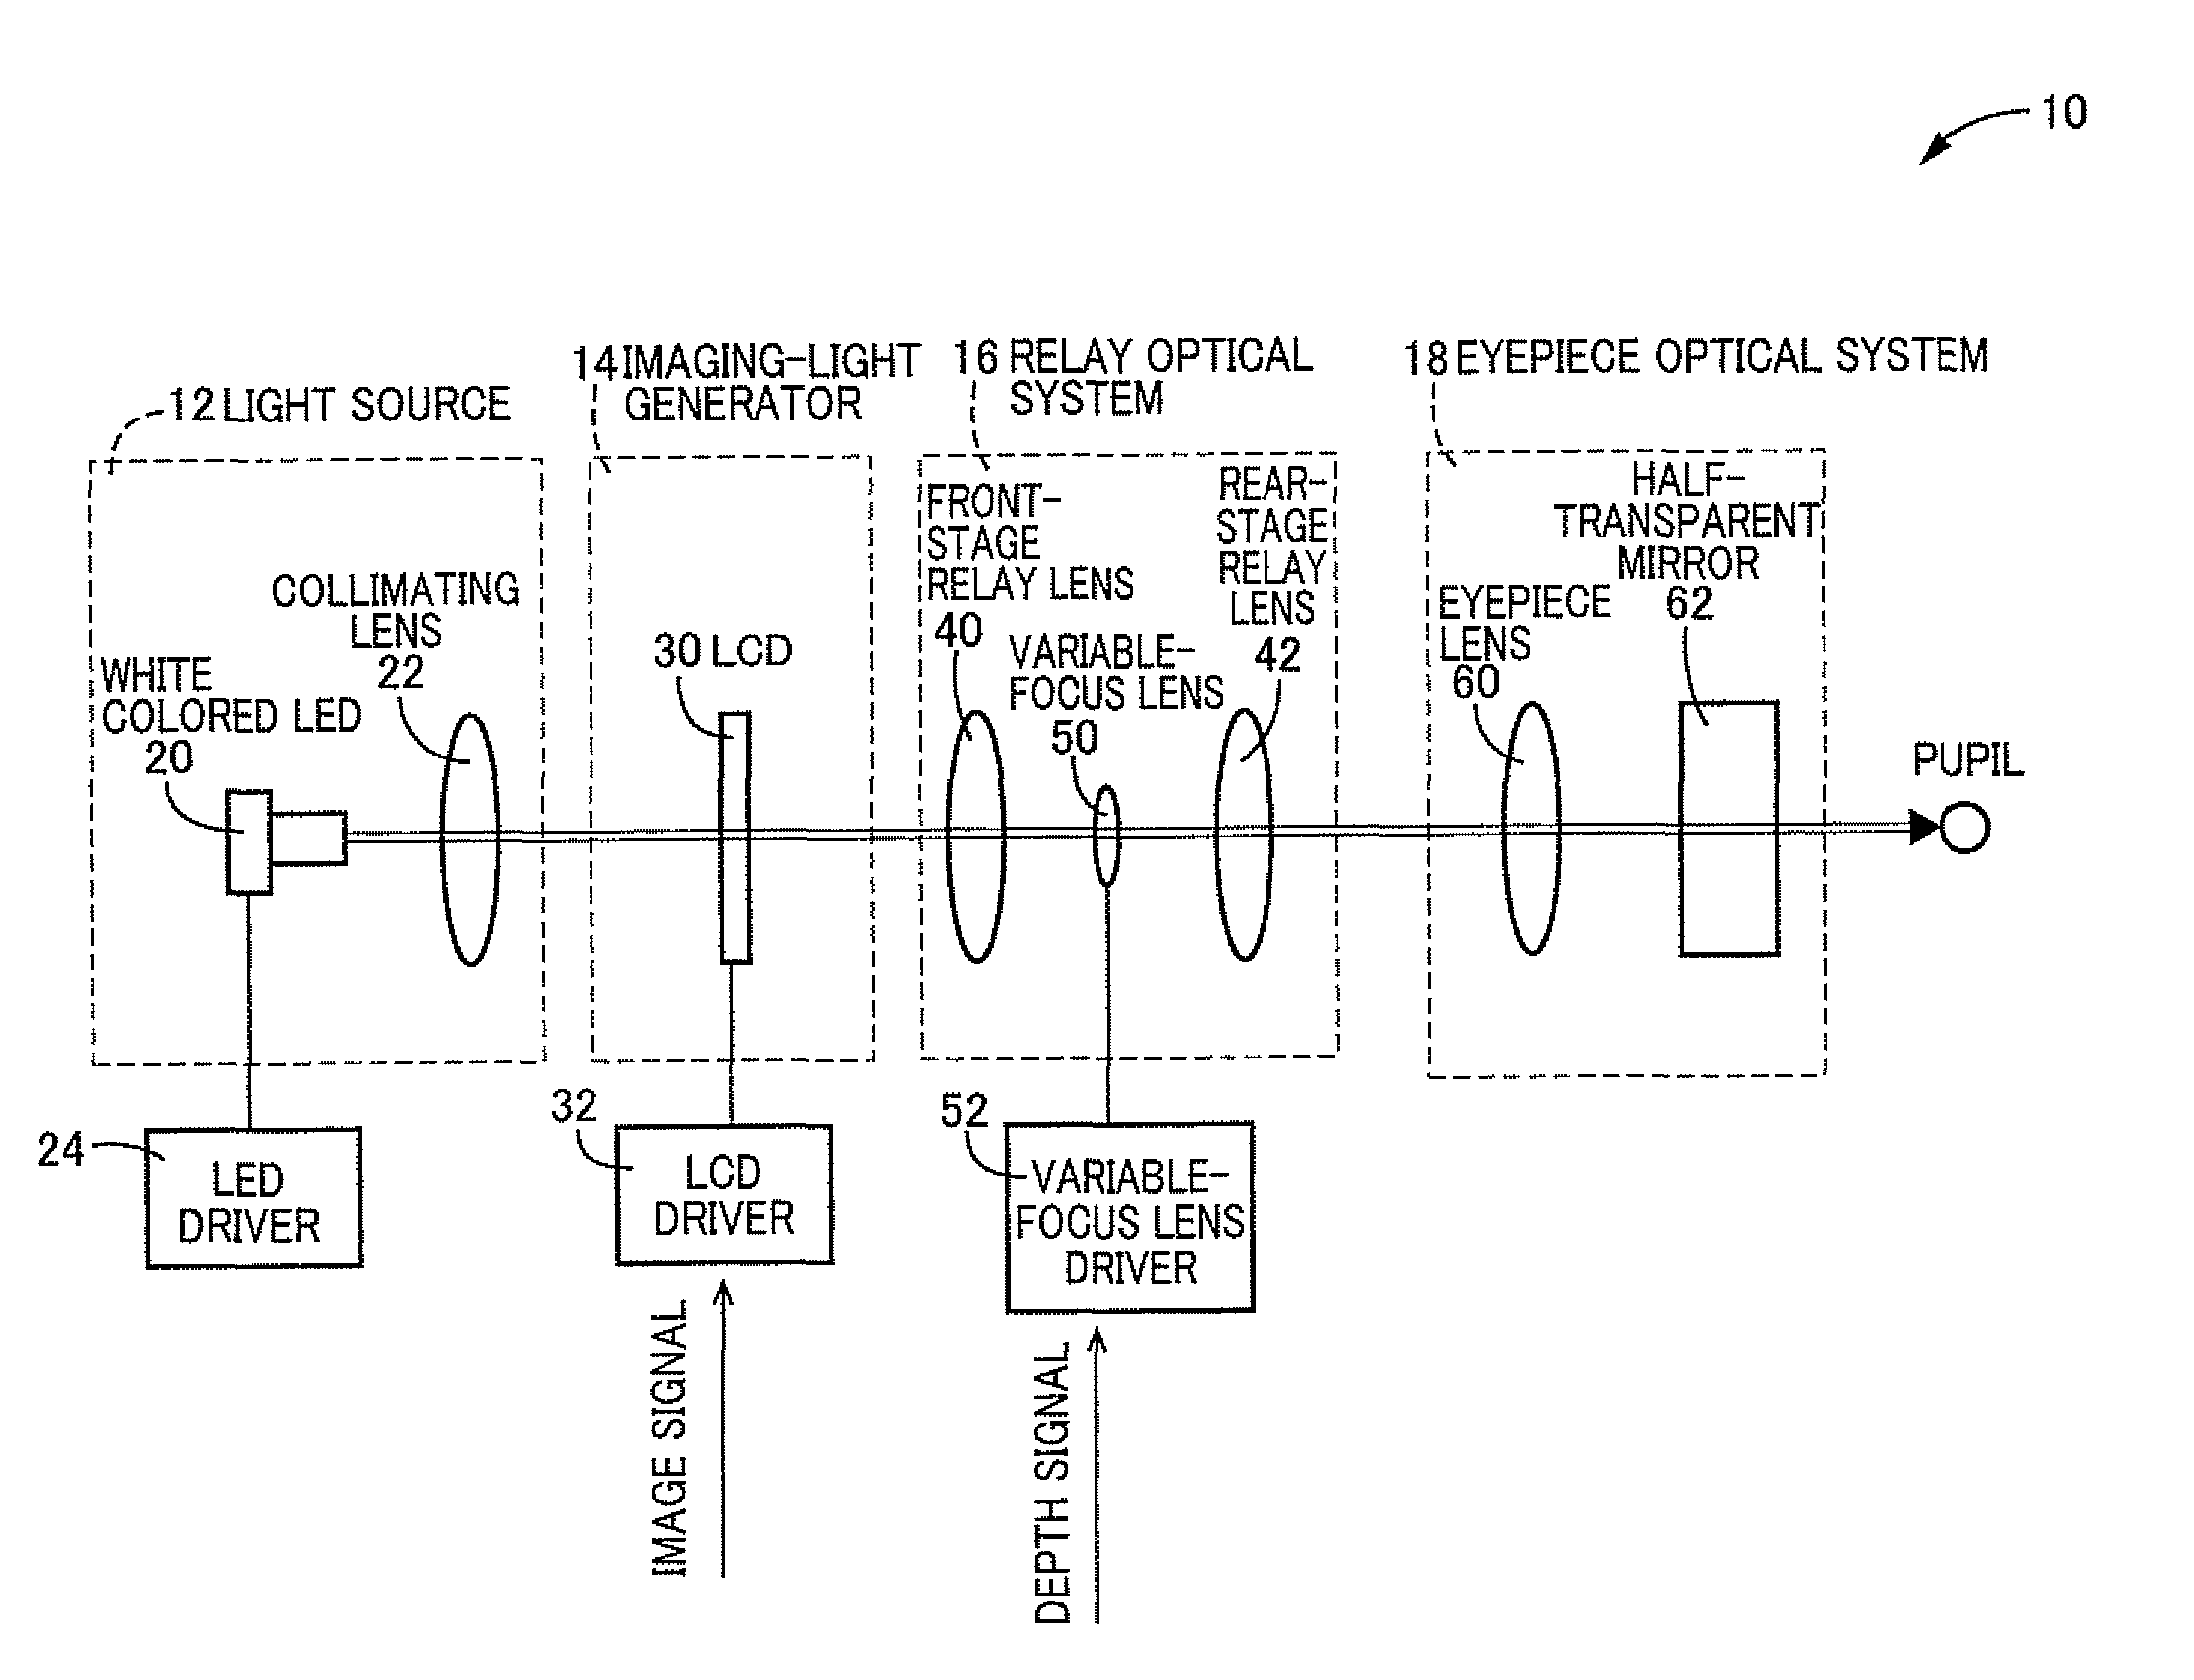 Image display device using variable-focus lens at conjugate image plane